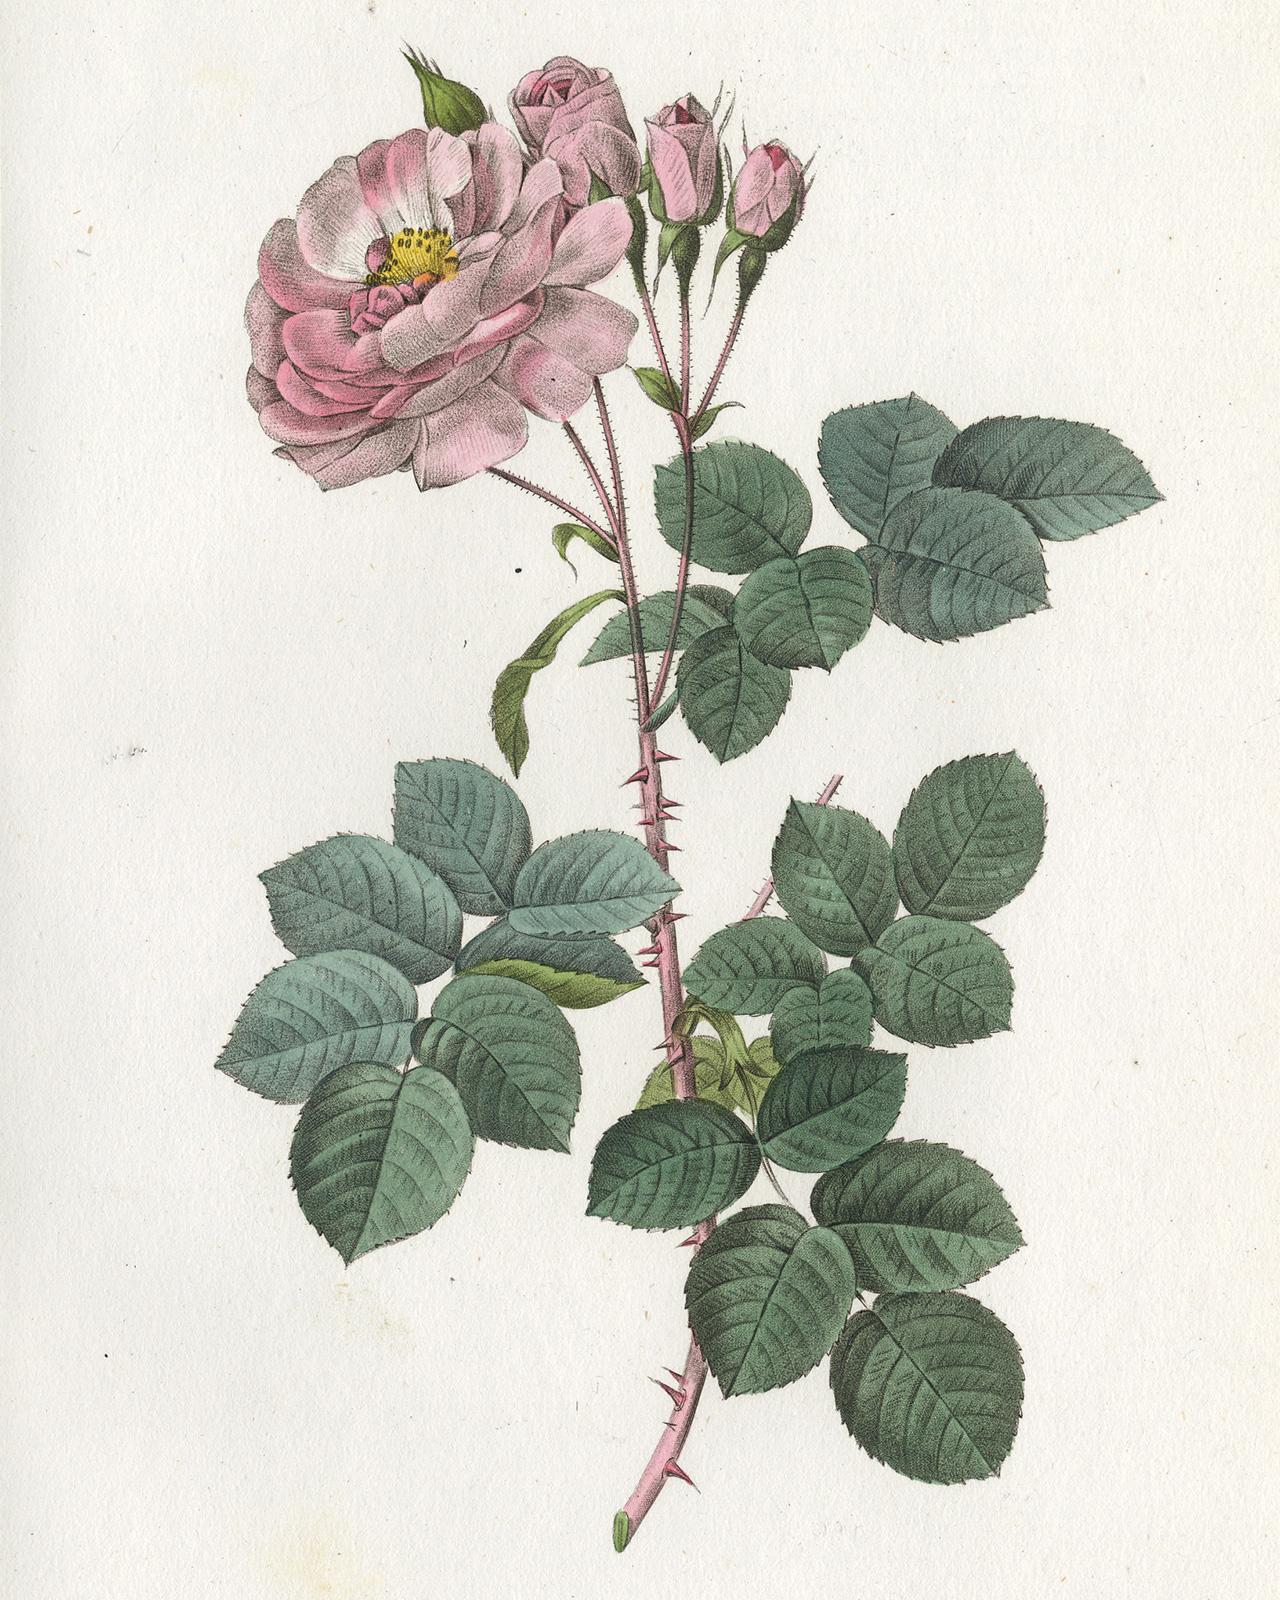 White Rose Celestial by Redoute - Handcoloured engraving - 19th century - Print by Pierre-Joseph Redouté